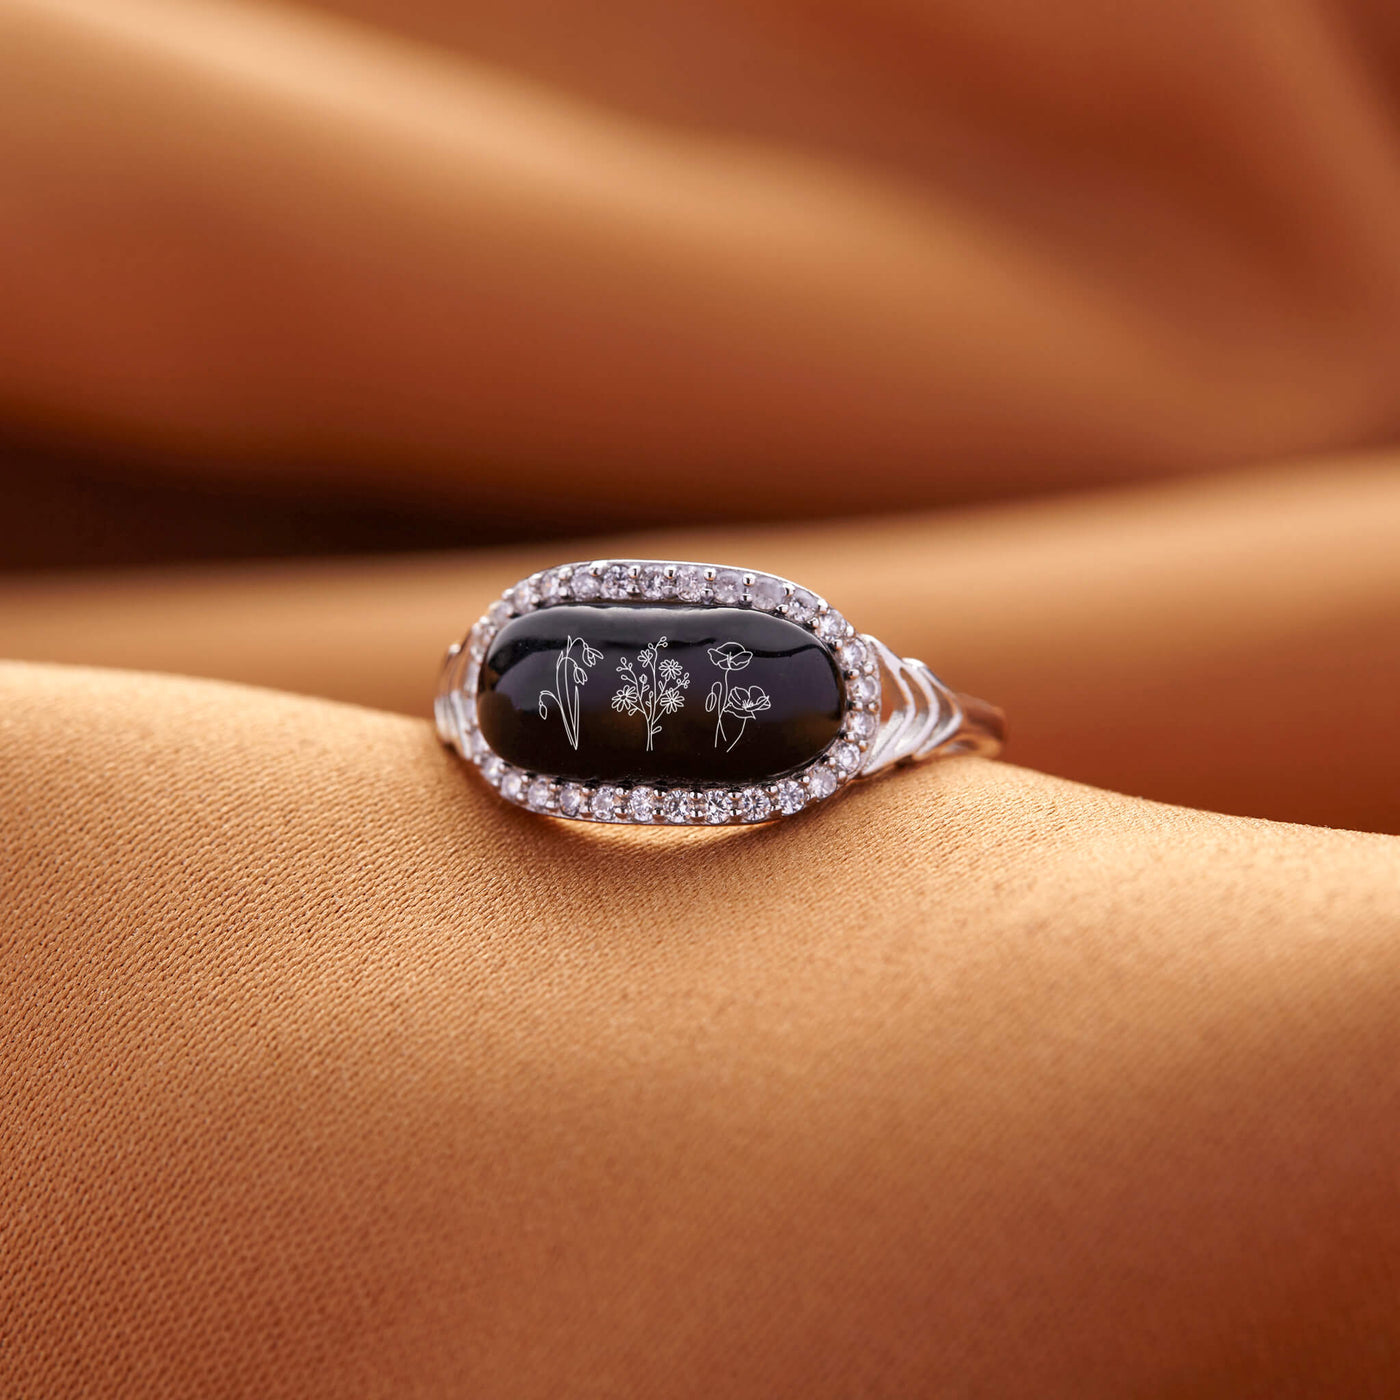 S925 PERSONALIZED FAR AWAY FROM WORRIES FLOWERS AGATE RING